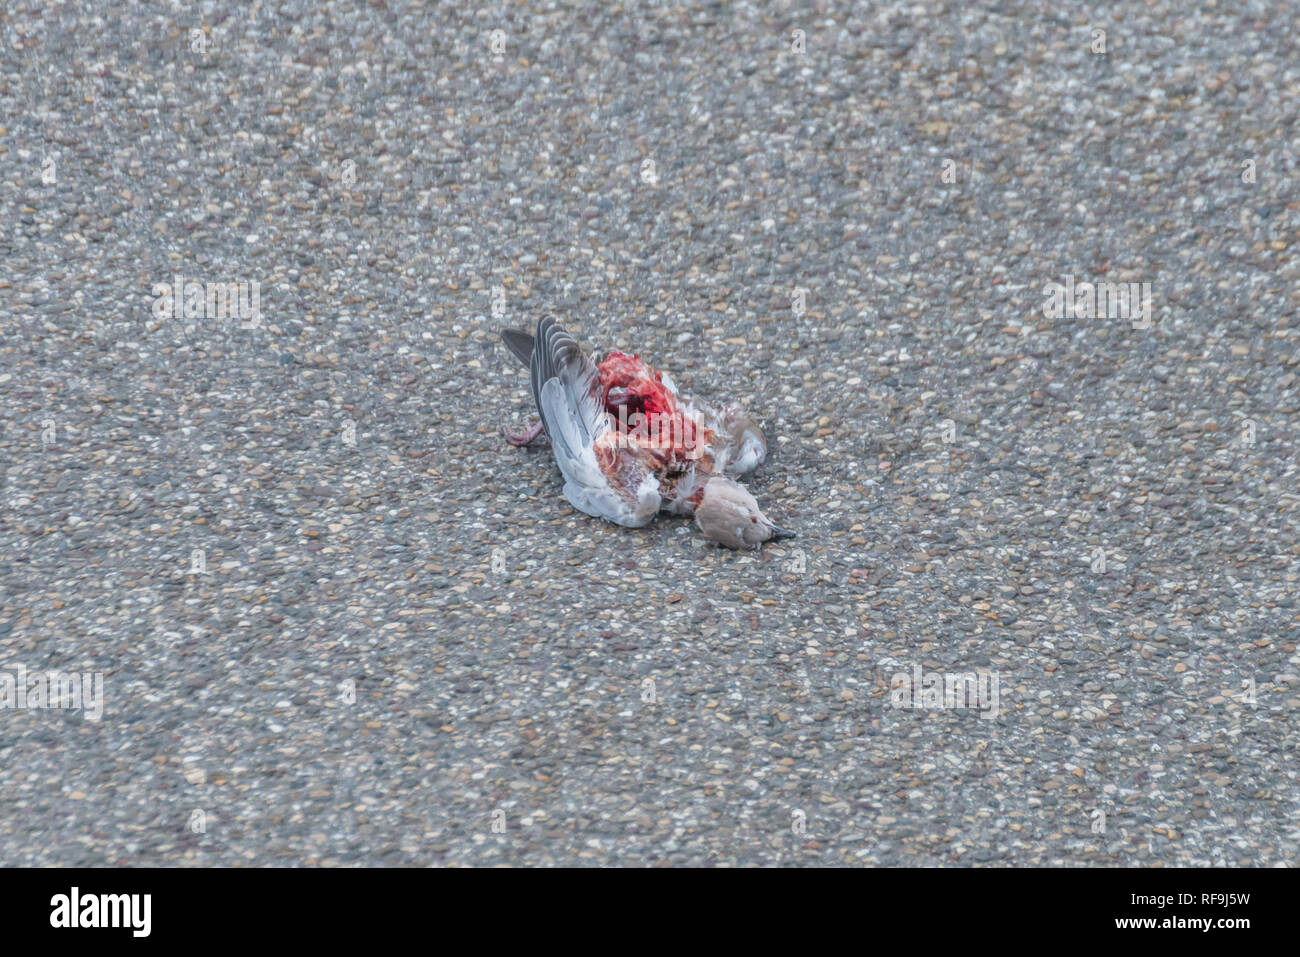 A dead bird on the road run over by a car, Germany Stock Photo